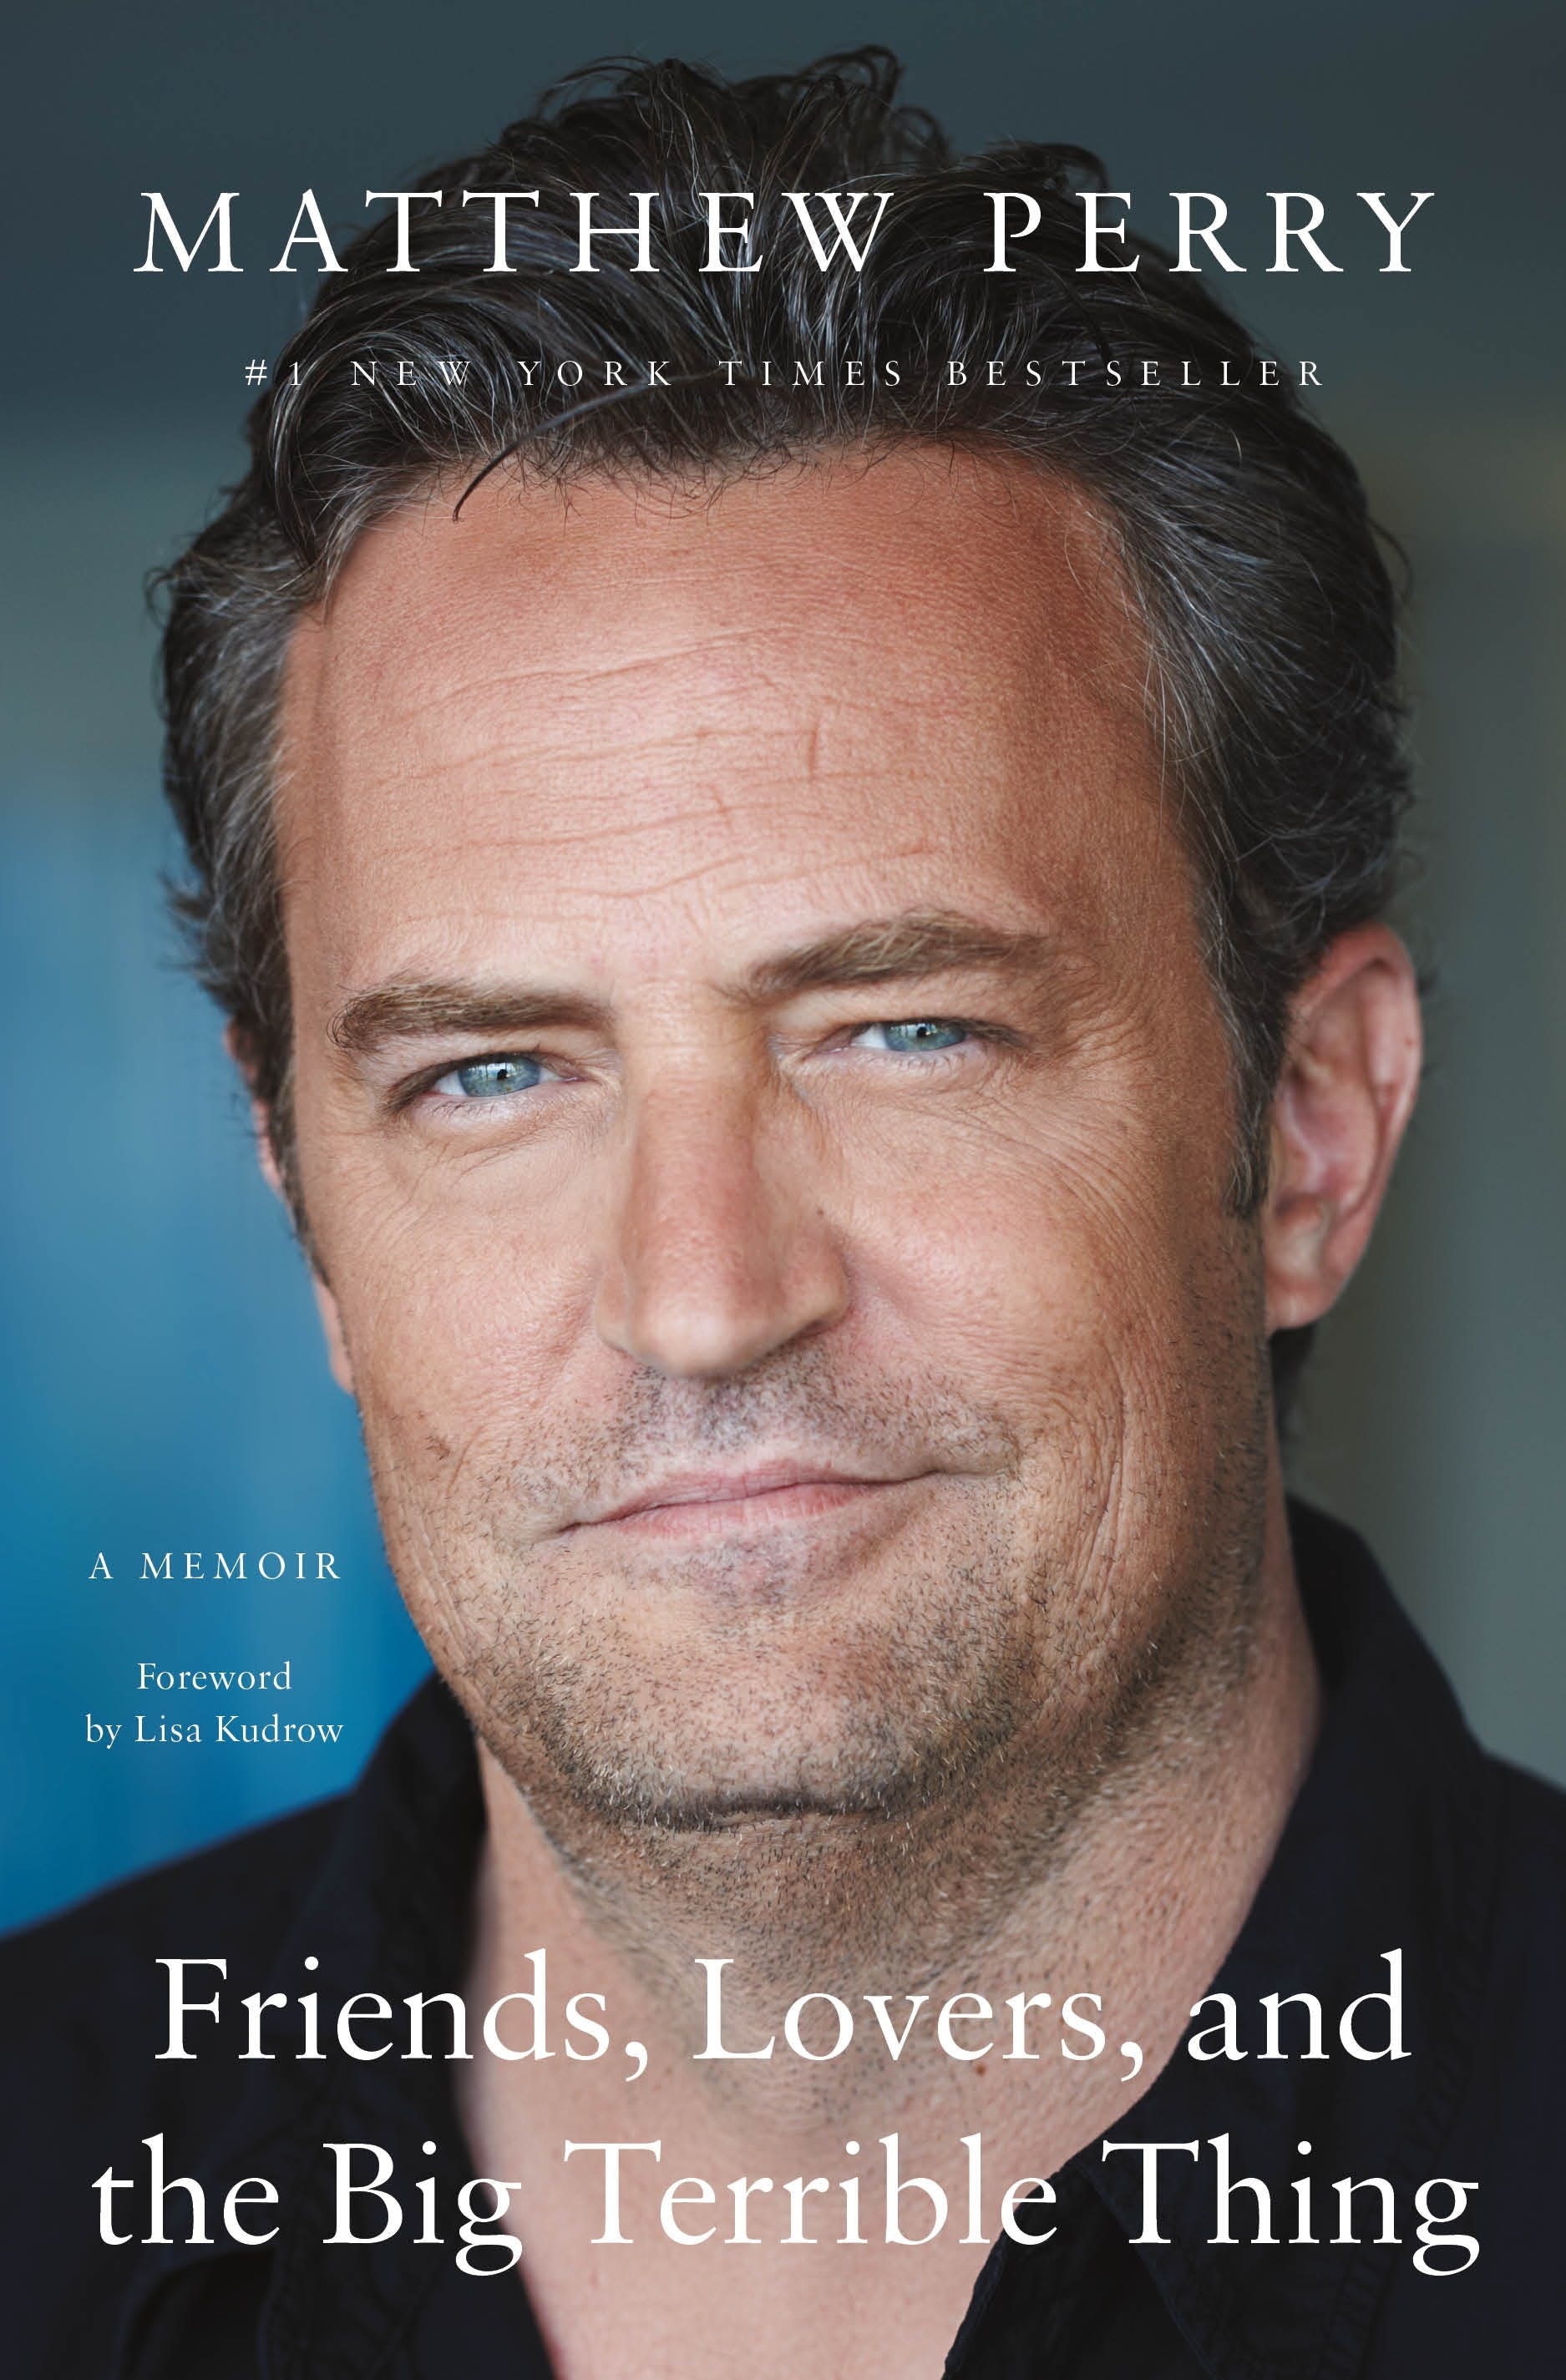 Book “Friends, Lovers, and the Big Terrible Thing: A Memoir” by Matthew Perry — November 1, 2022